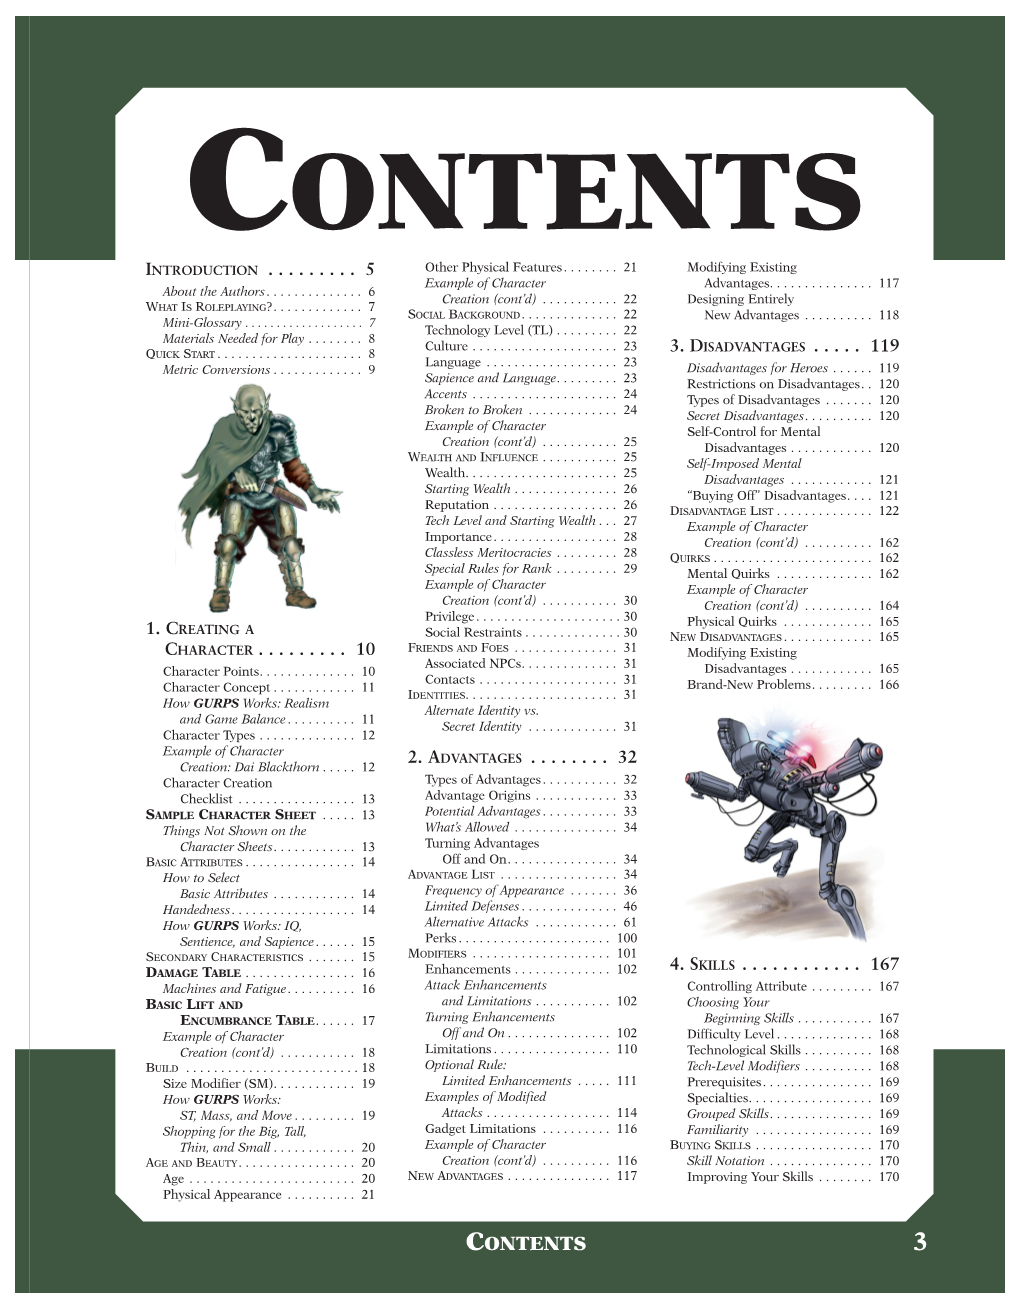 Contents Introduction